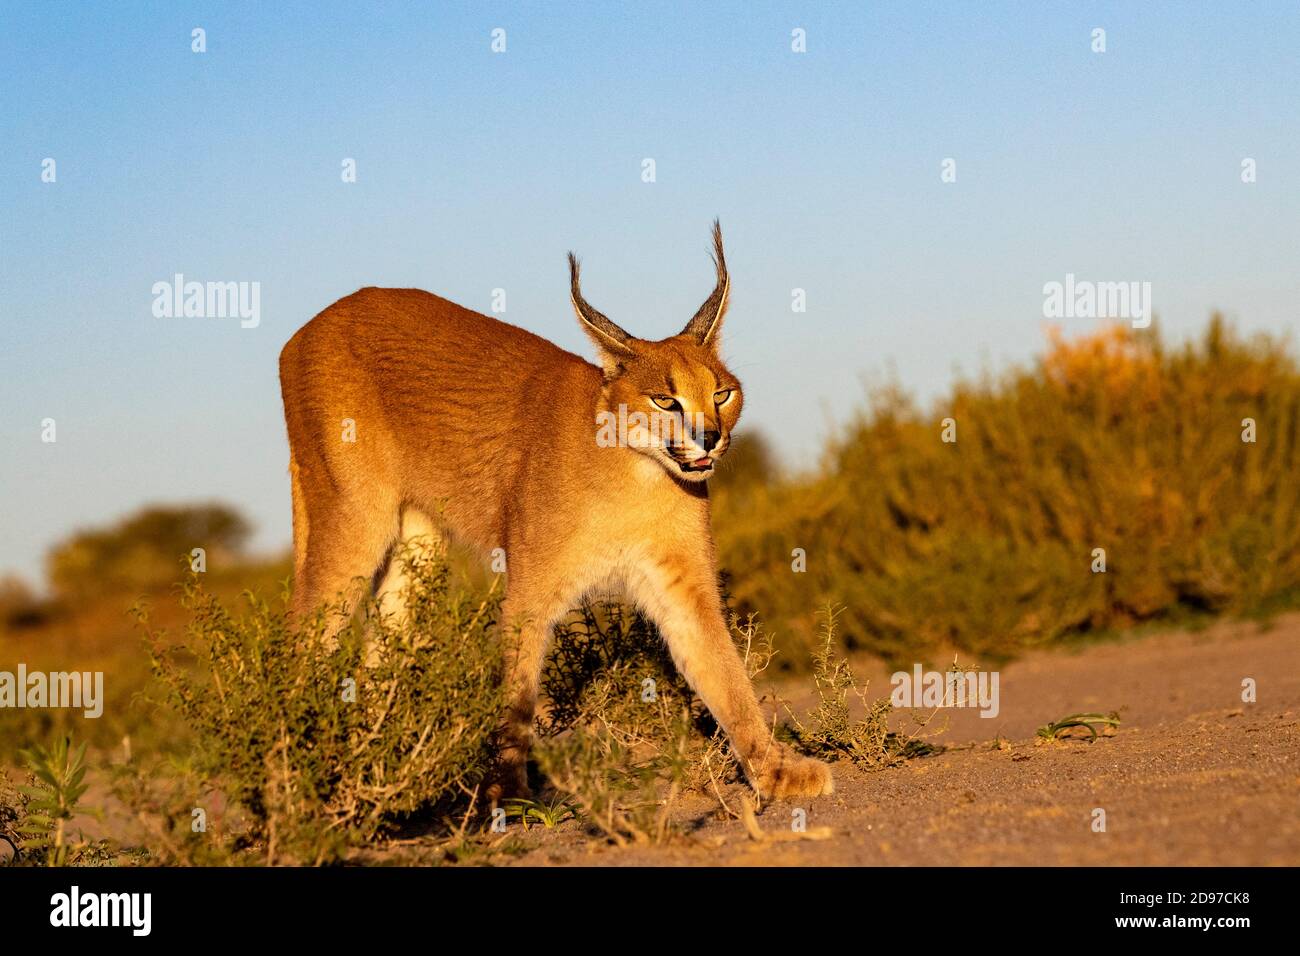 Caracal (Caracal caracal), Occurs in Africa and Asia, Namibia, Private reserve, Adult under controlled conditions, walking Stock Photo